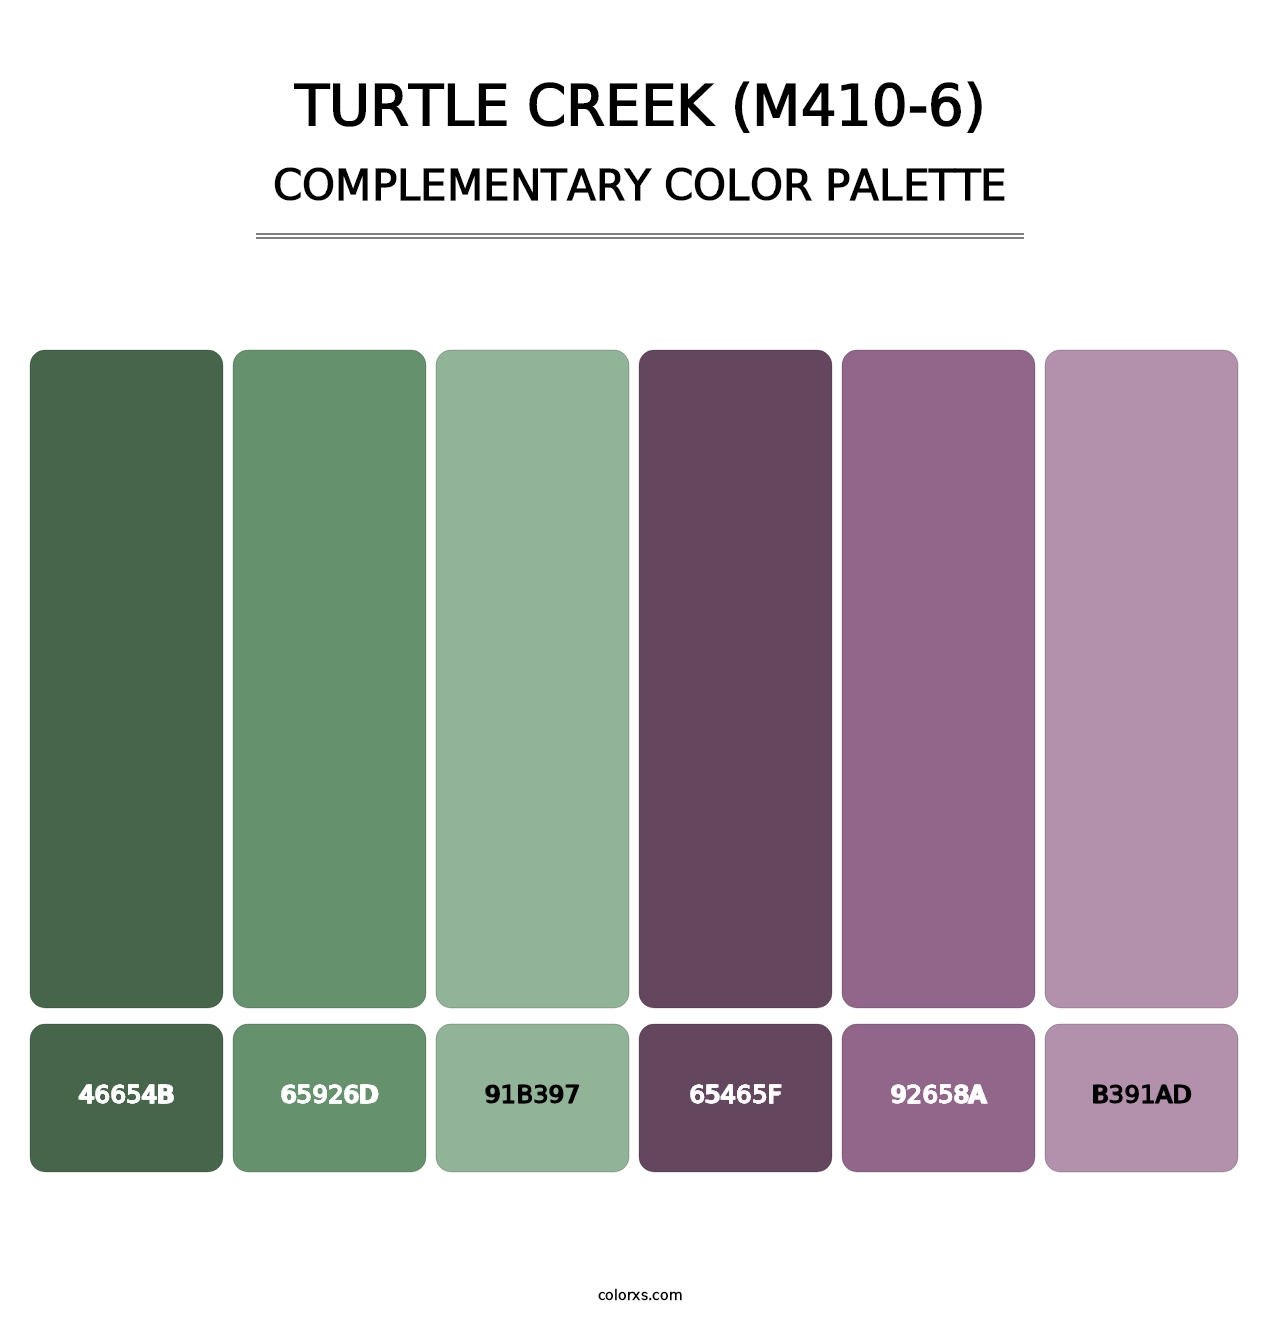 Turtle Creek (M410-6) - Complementary Color Palette